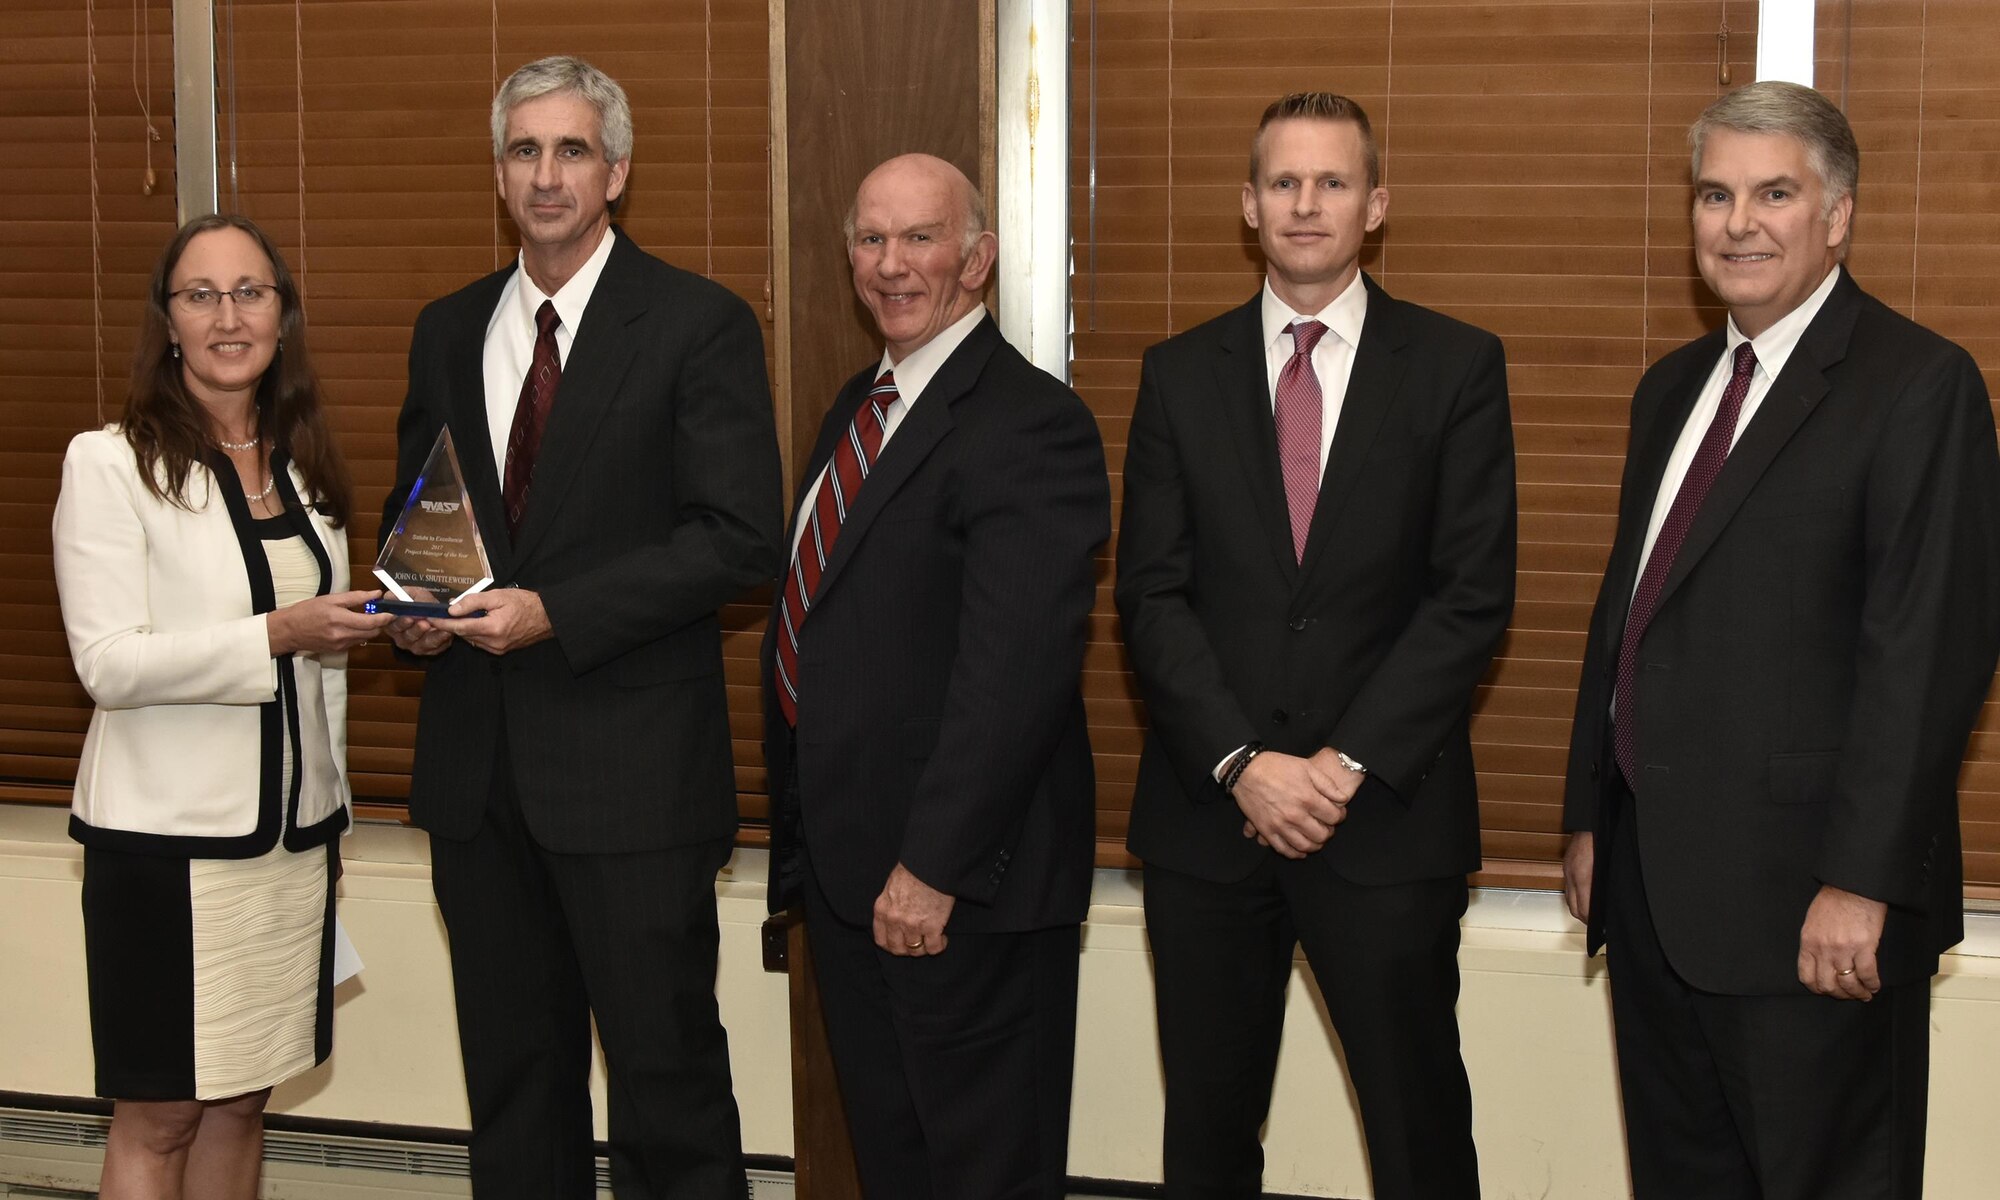 John Shuttleworth (second from left), Capital Project manager, receives the Project Manager of the Year Award from NAS General Manager Cynthia Rivera during the National Aerospace Solutions 2017 Salute to Excellence Annual Awards Banquet held Nov. 16 at the Arnold Lakeside Center, Arnold AFB. Also pictured is NAS Deputy General Manager Doug Pearson, NAS Integrated Resources Director Ben Souther and NAS Test and Sustainment Engineering Manager Jeff Henderson. (U.S. Air Force photo/Rick Goodfriend)